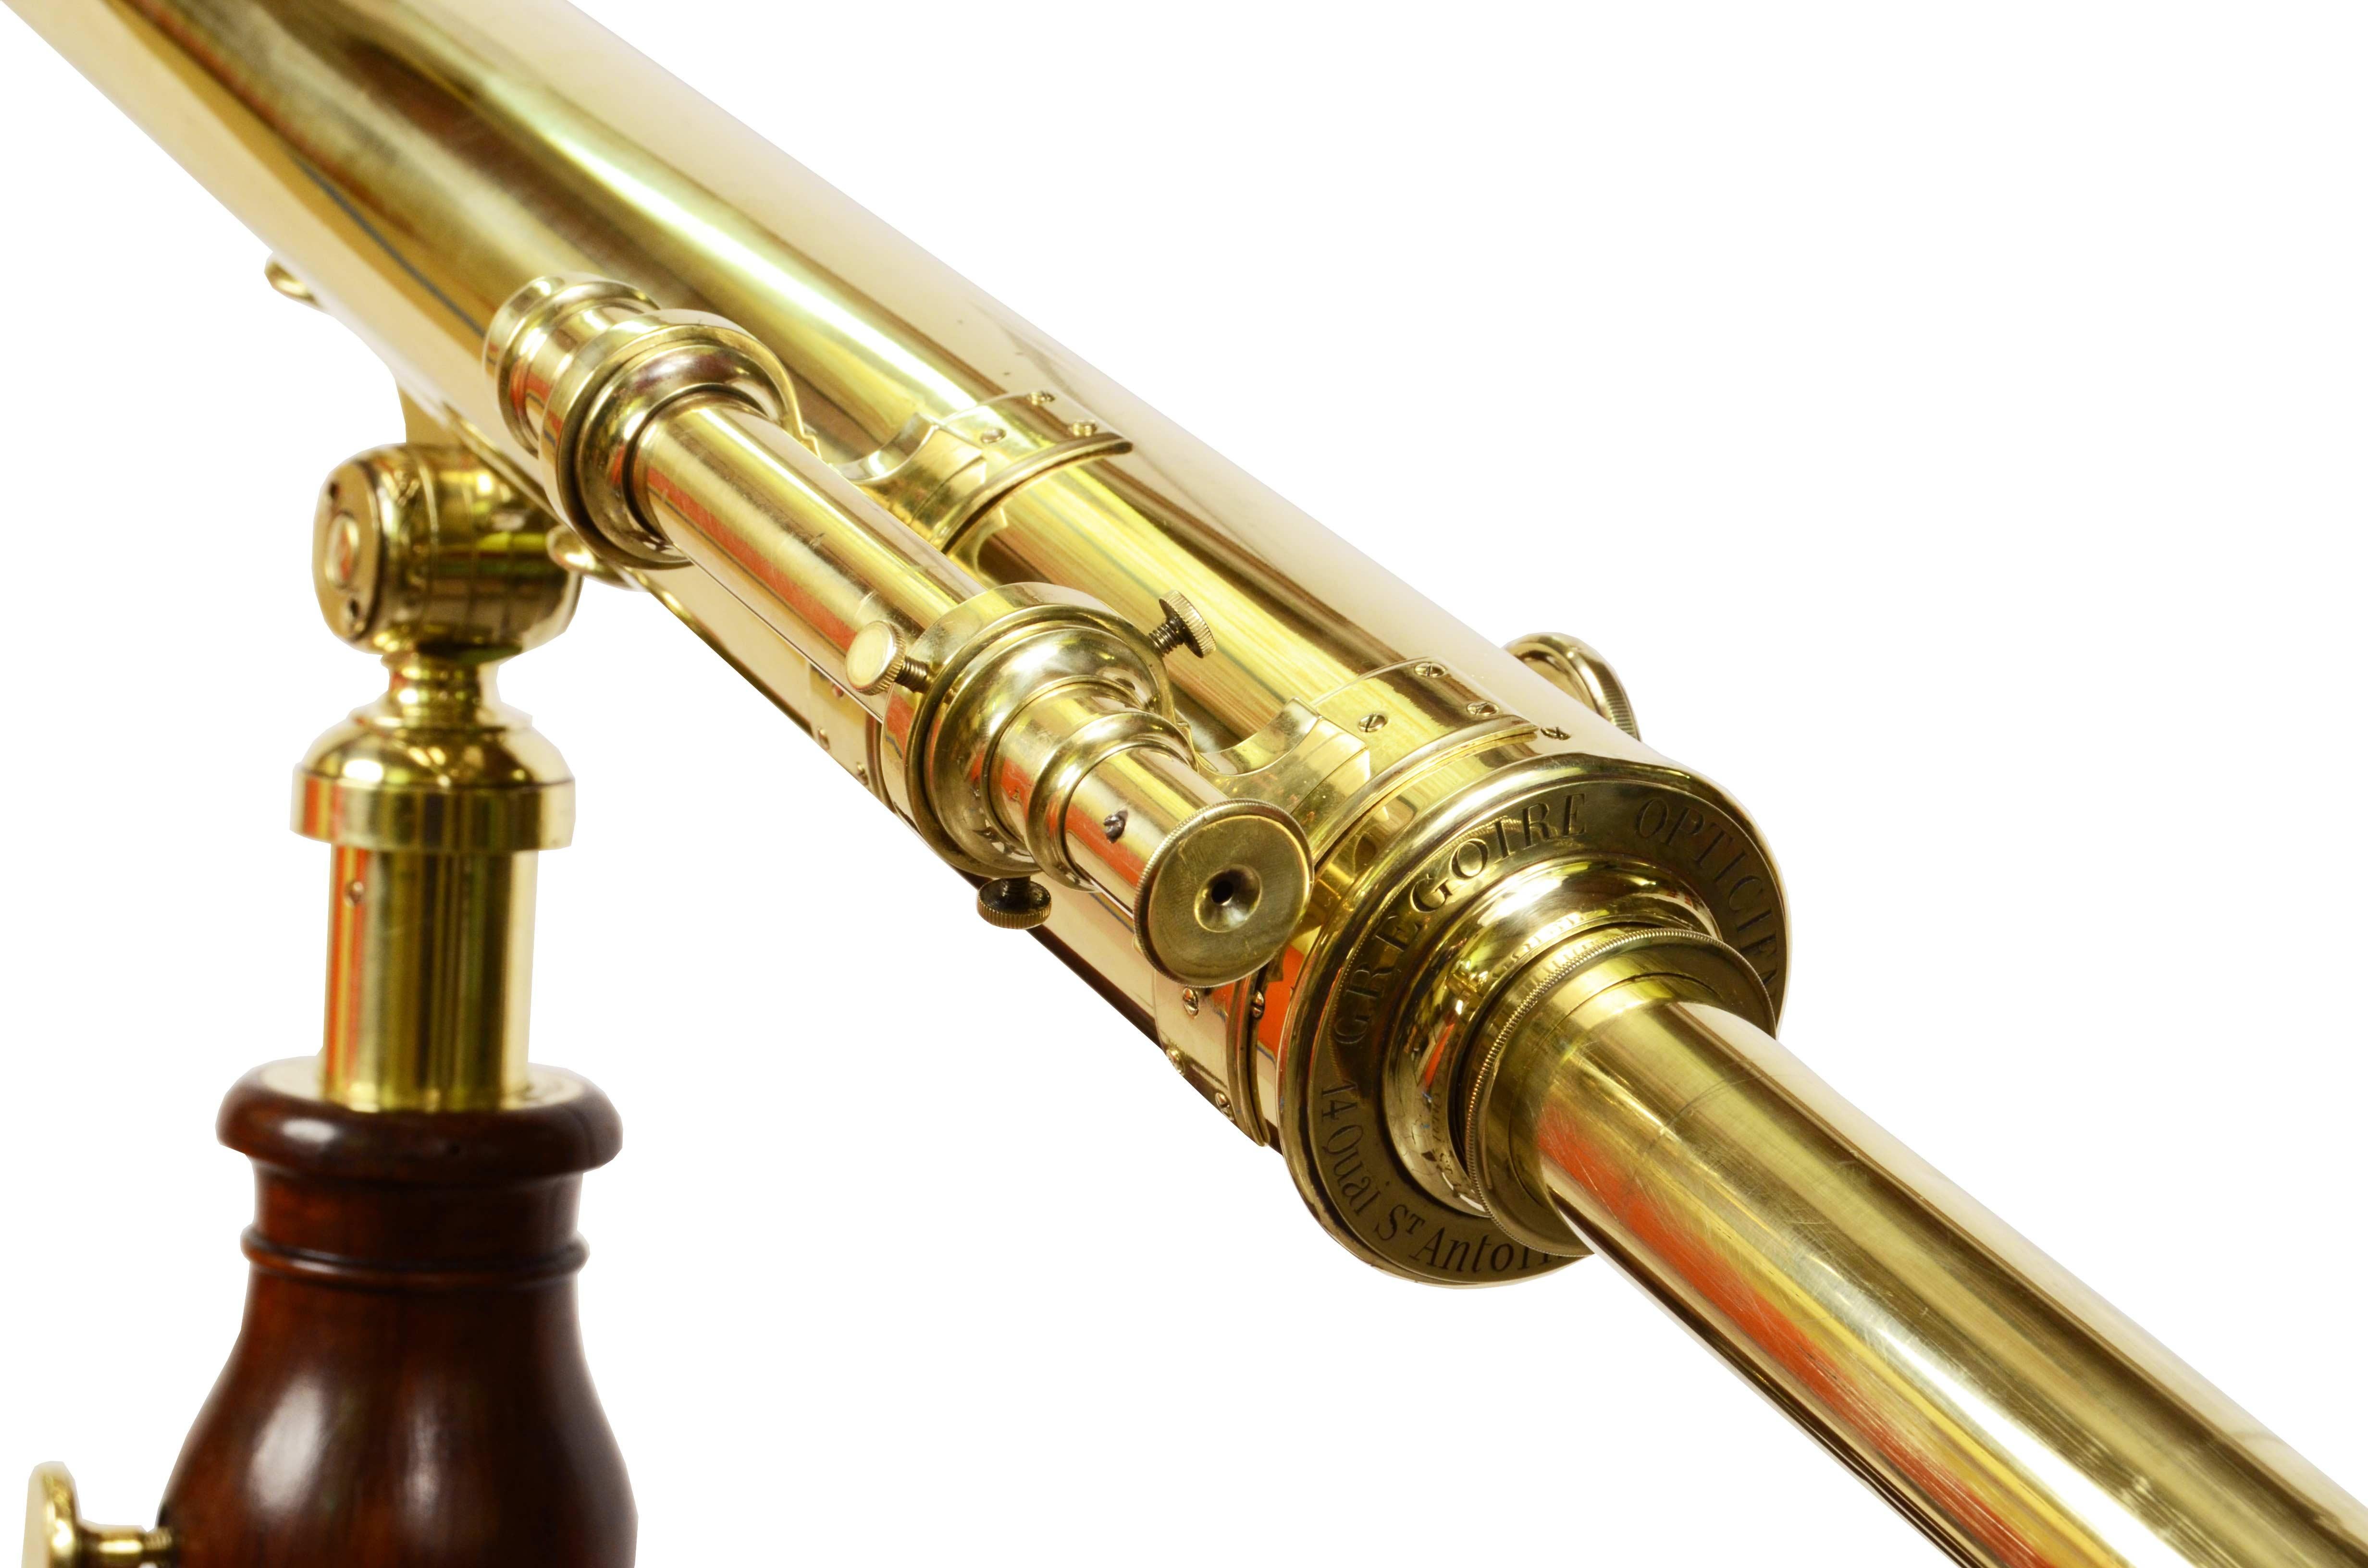 Late 19th Century 19th Century French Brass Astronomical Telescope Signed Gregoire Opticien Lyon